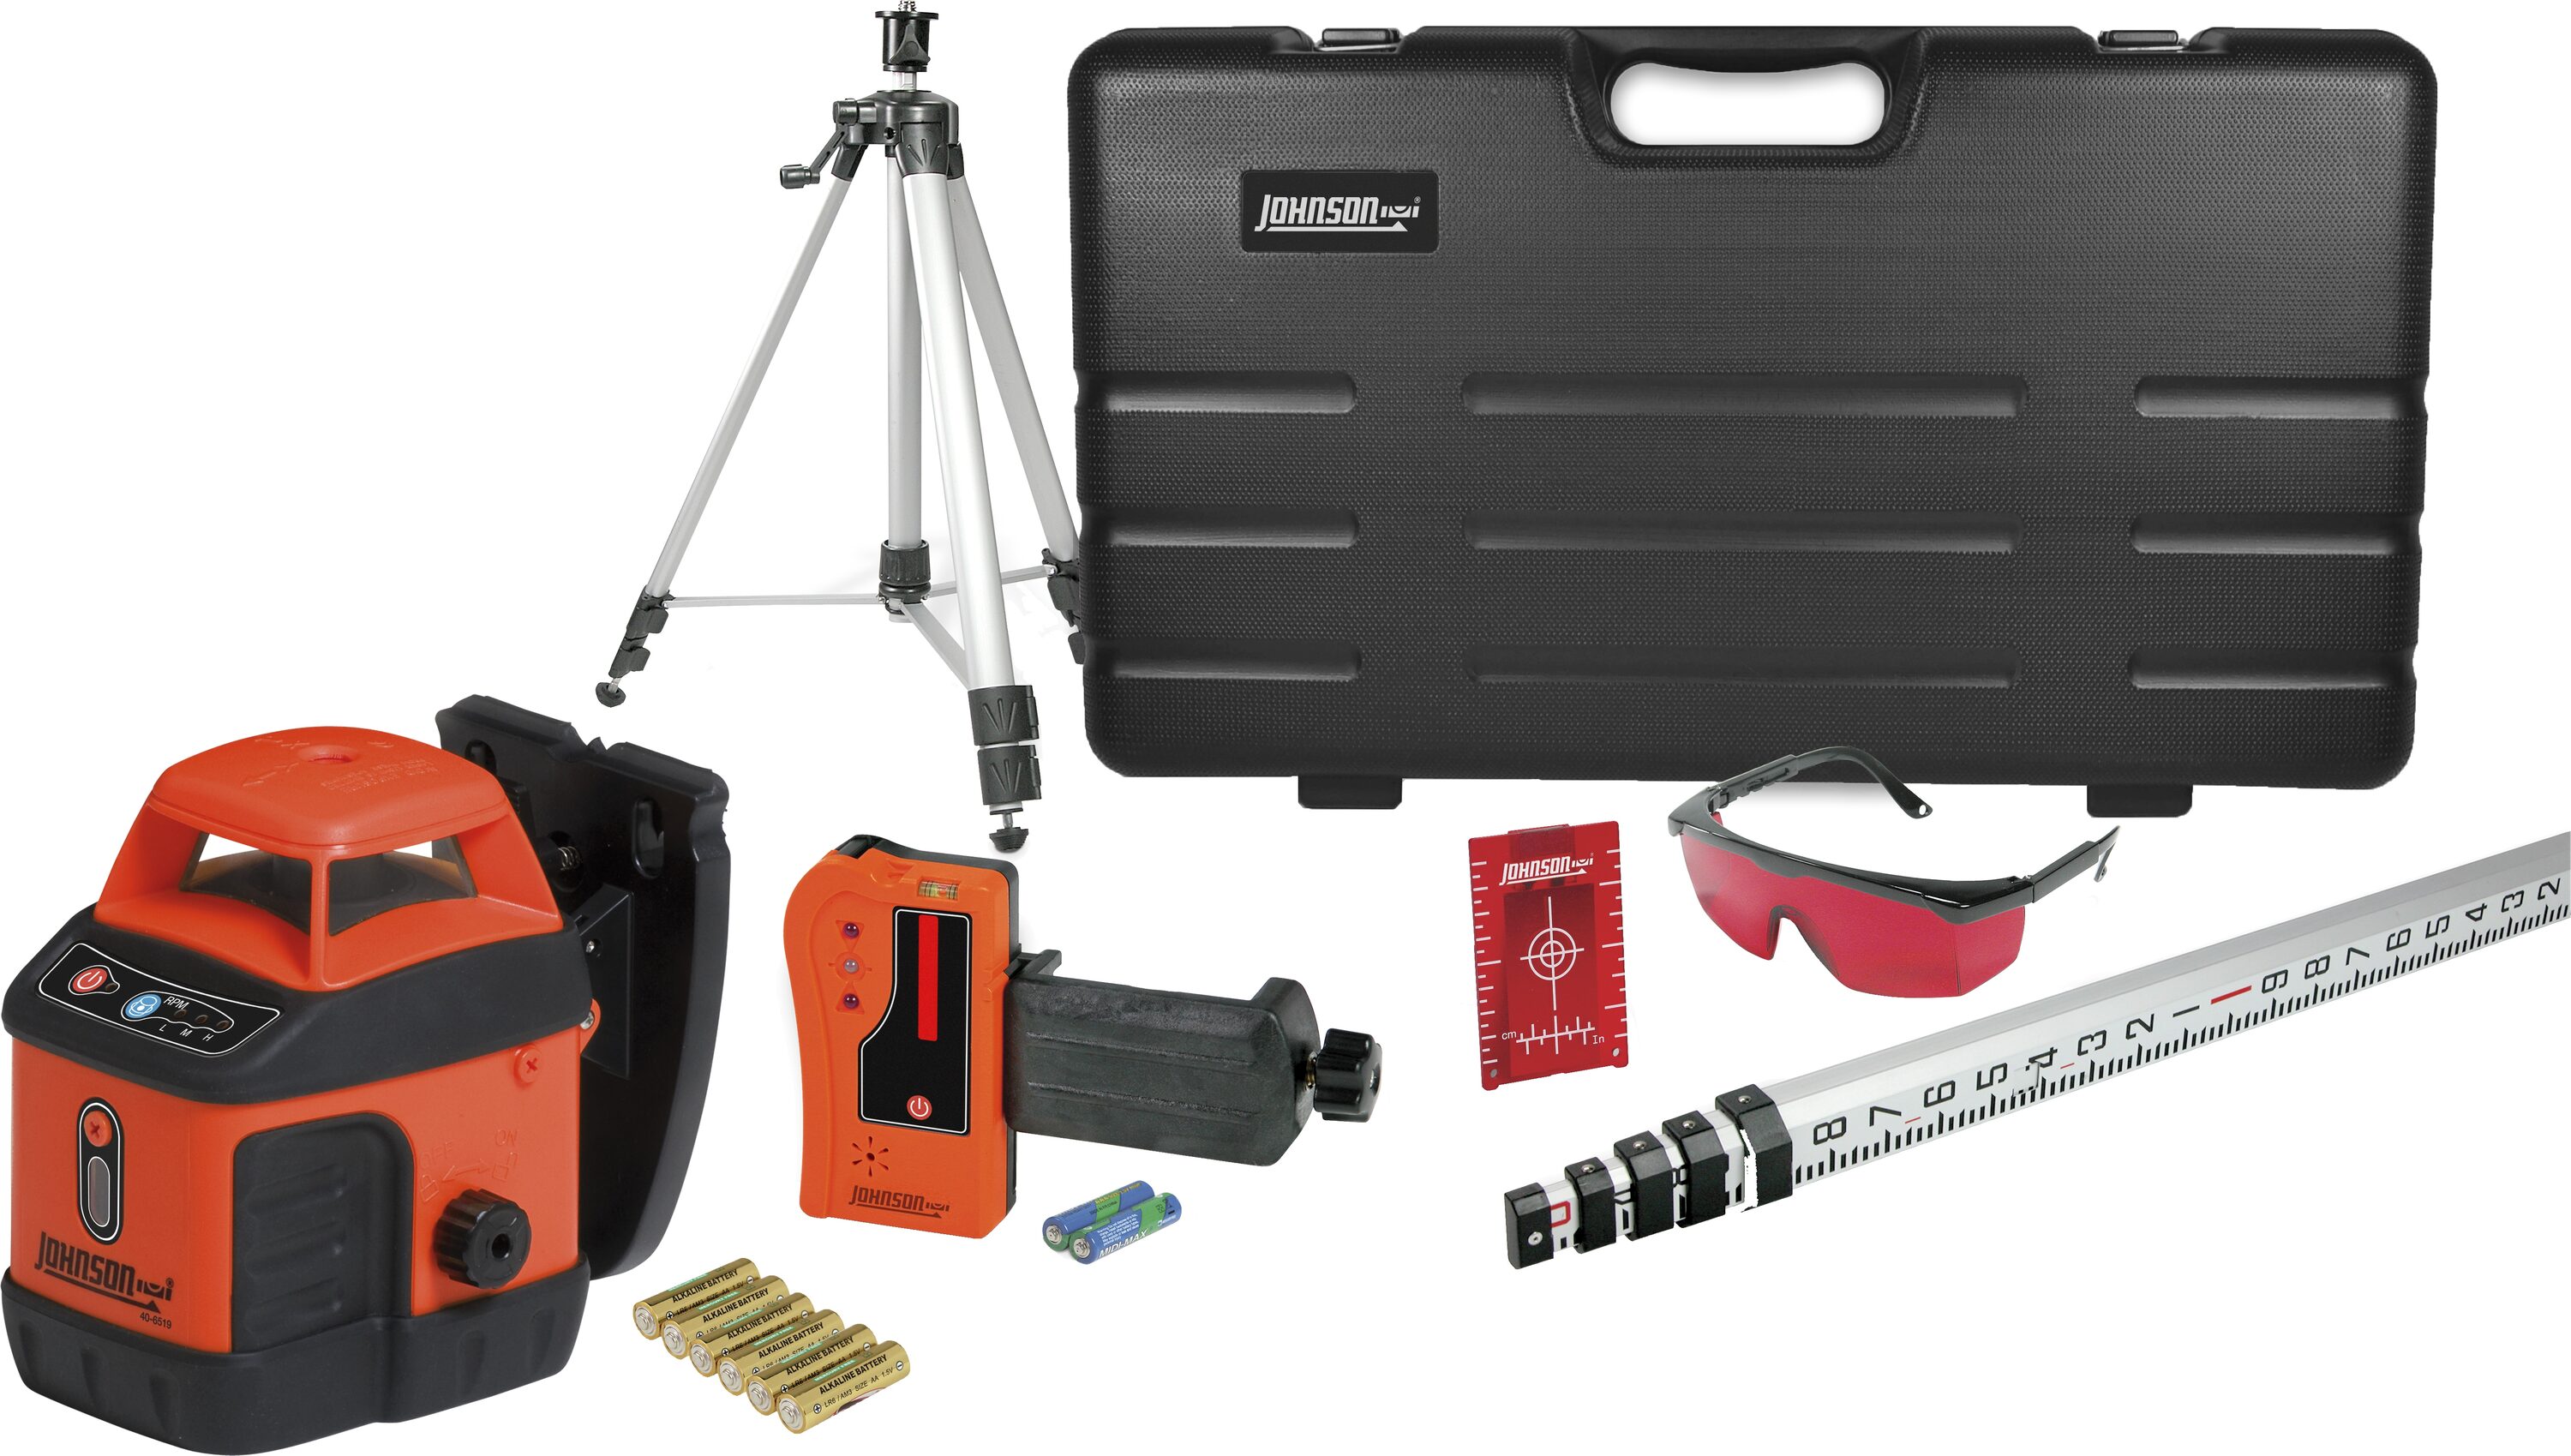 Red 800-ft Self-Leveling Indoor/Outdoor Rotary Laser Level with 360 Beam | - Johnson Level 40-6519